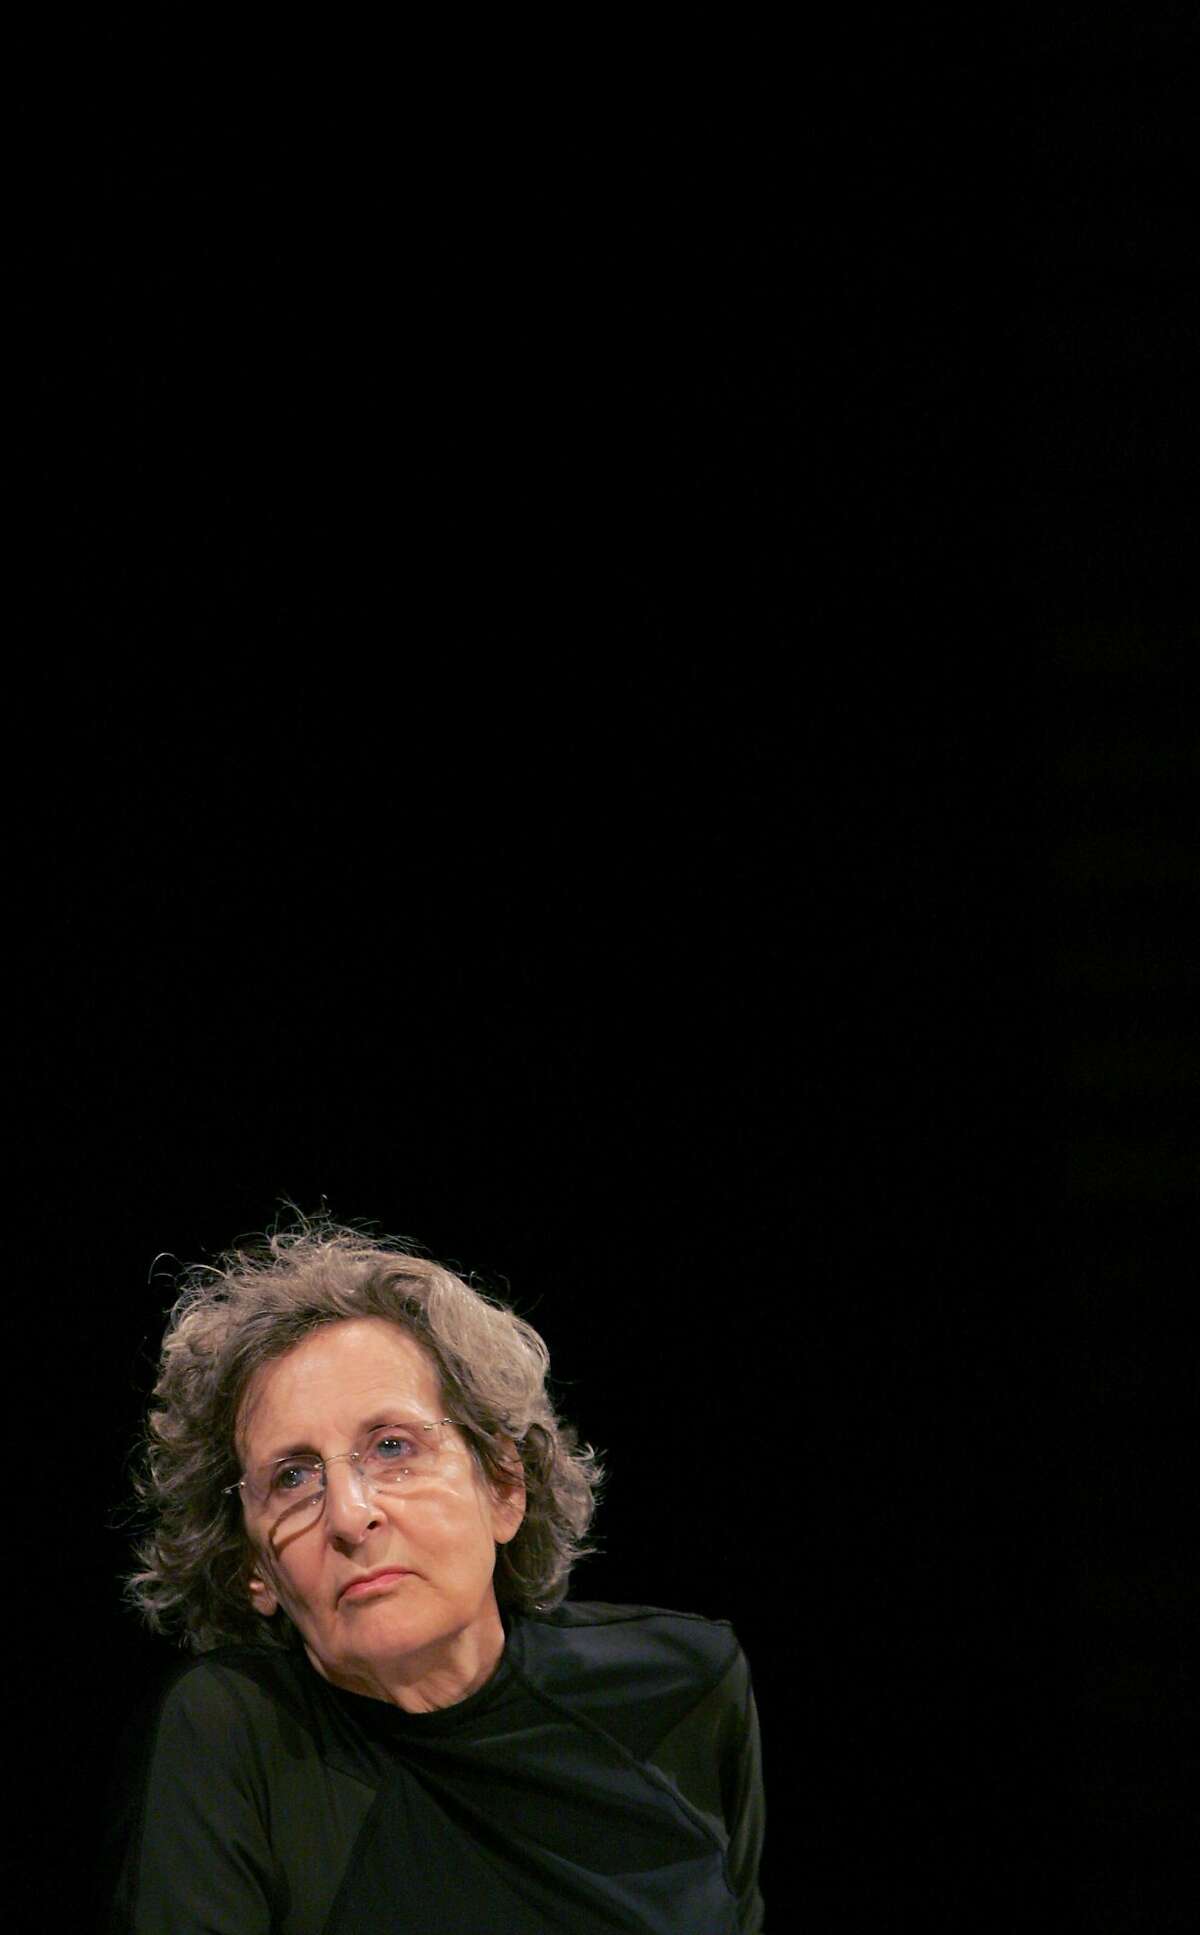 (FILES) This file photo taken on January 05, 2006 shows US post modern dance choregrapher Trisha Brown, at a press conference, in Paris. The Choregrapher died on March 18, 2017 it was announced on the Twitter account of her Dance company on March 20, 2017. / AFP PHOTO / JACQUES DEMARTHONJACQUES DEMARTHON/AFP/Getty Images